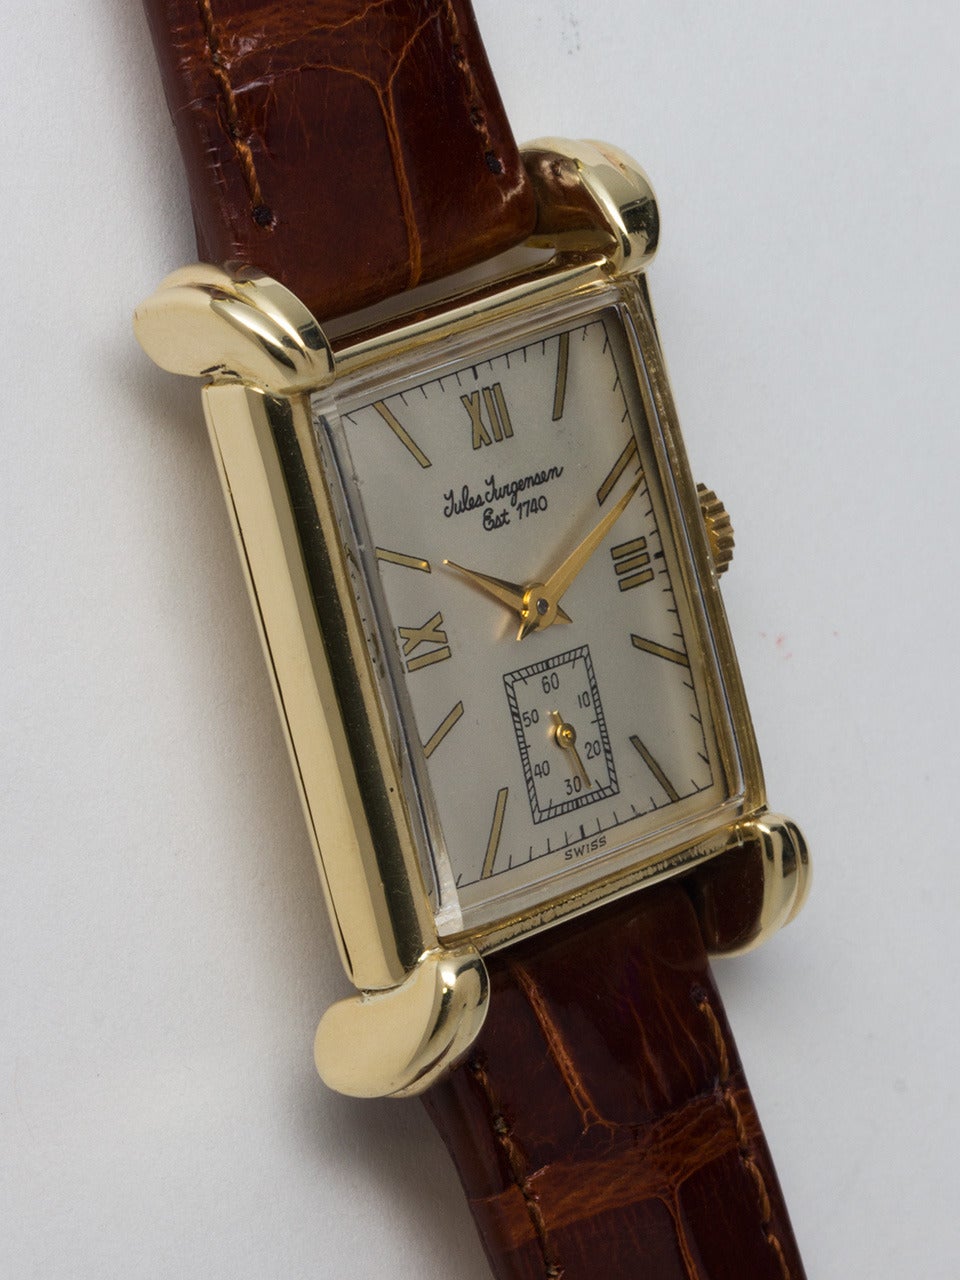 Jules Jurgensen 14k yellow gold rectangular wristwatch, circa 1940s. 23 x 34mm case with large lobed lugs. WIth nicely restored silvered dial with printed Roman and baton numerals, gilt hands. Powered by a 17-jewel manual-wind movement with